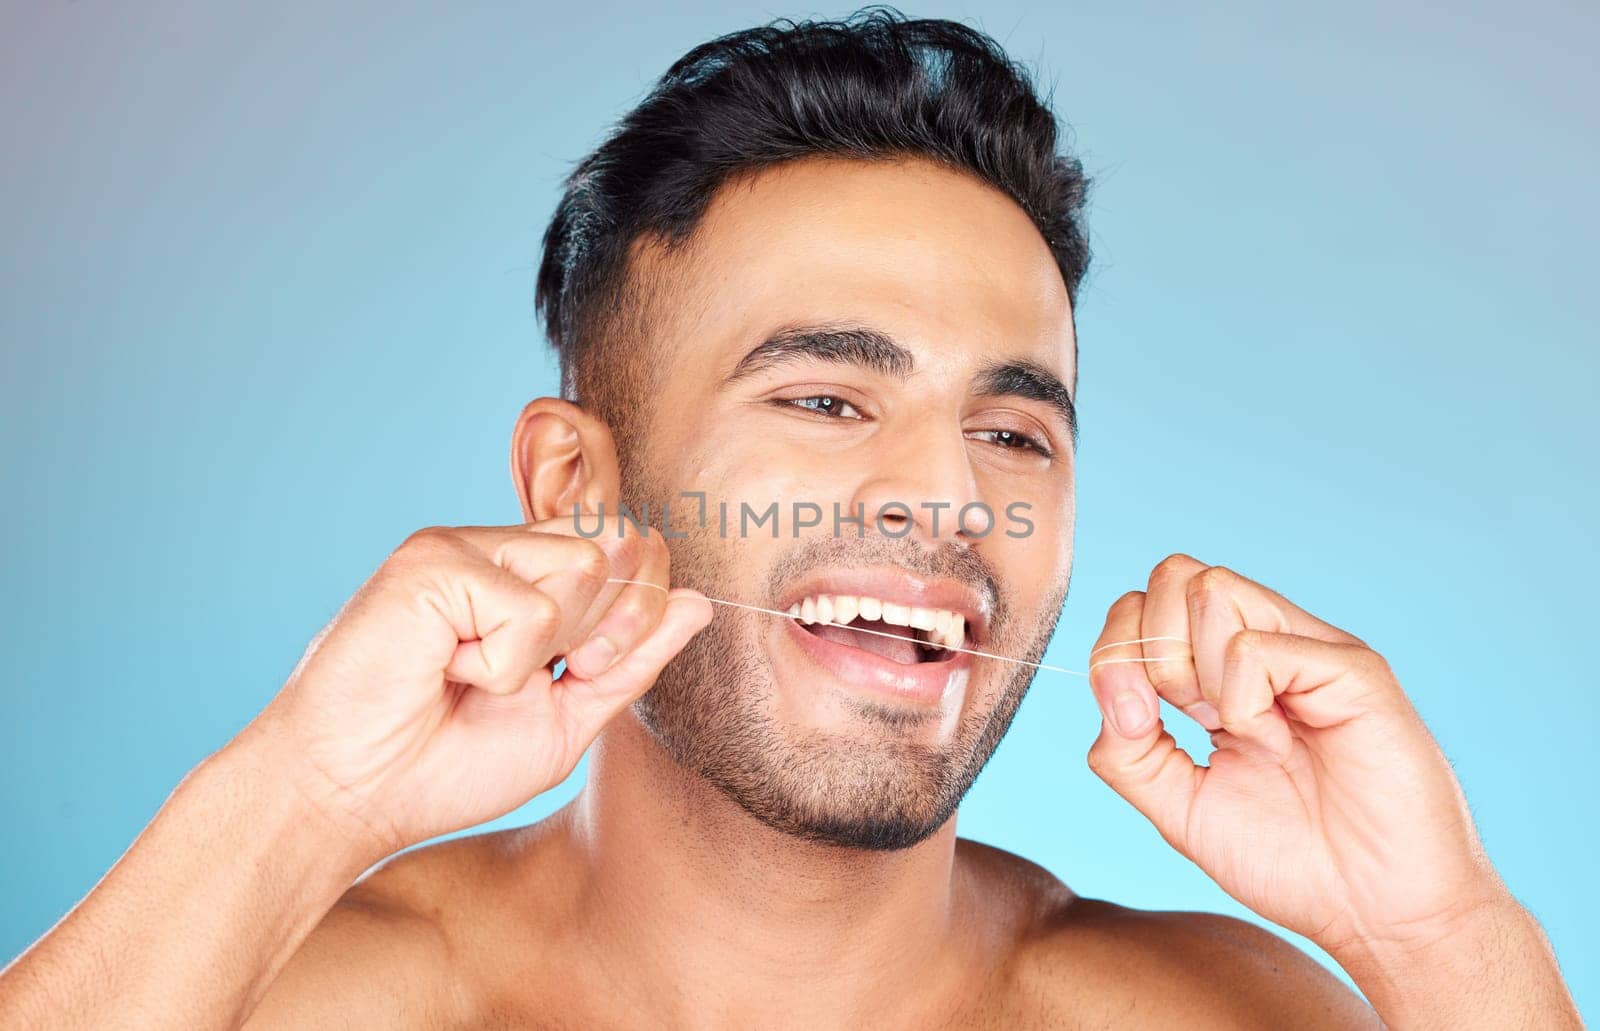 Floss, Mexican man and dental health for smile, fresh breath and after brushing teeth against blue studio background. Oral health, Latino male and string to clean mouth, hygiene and morning routine